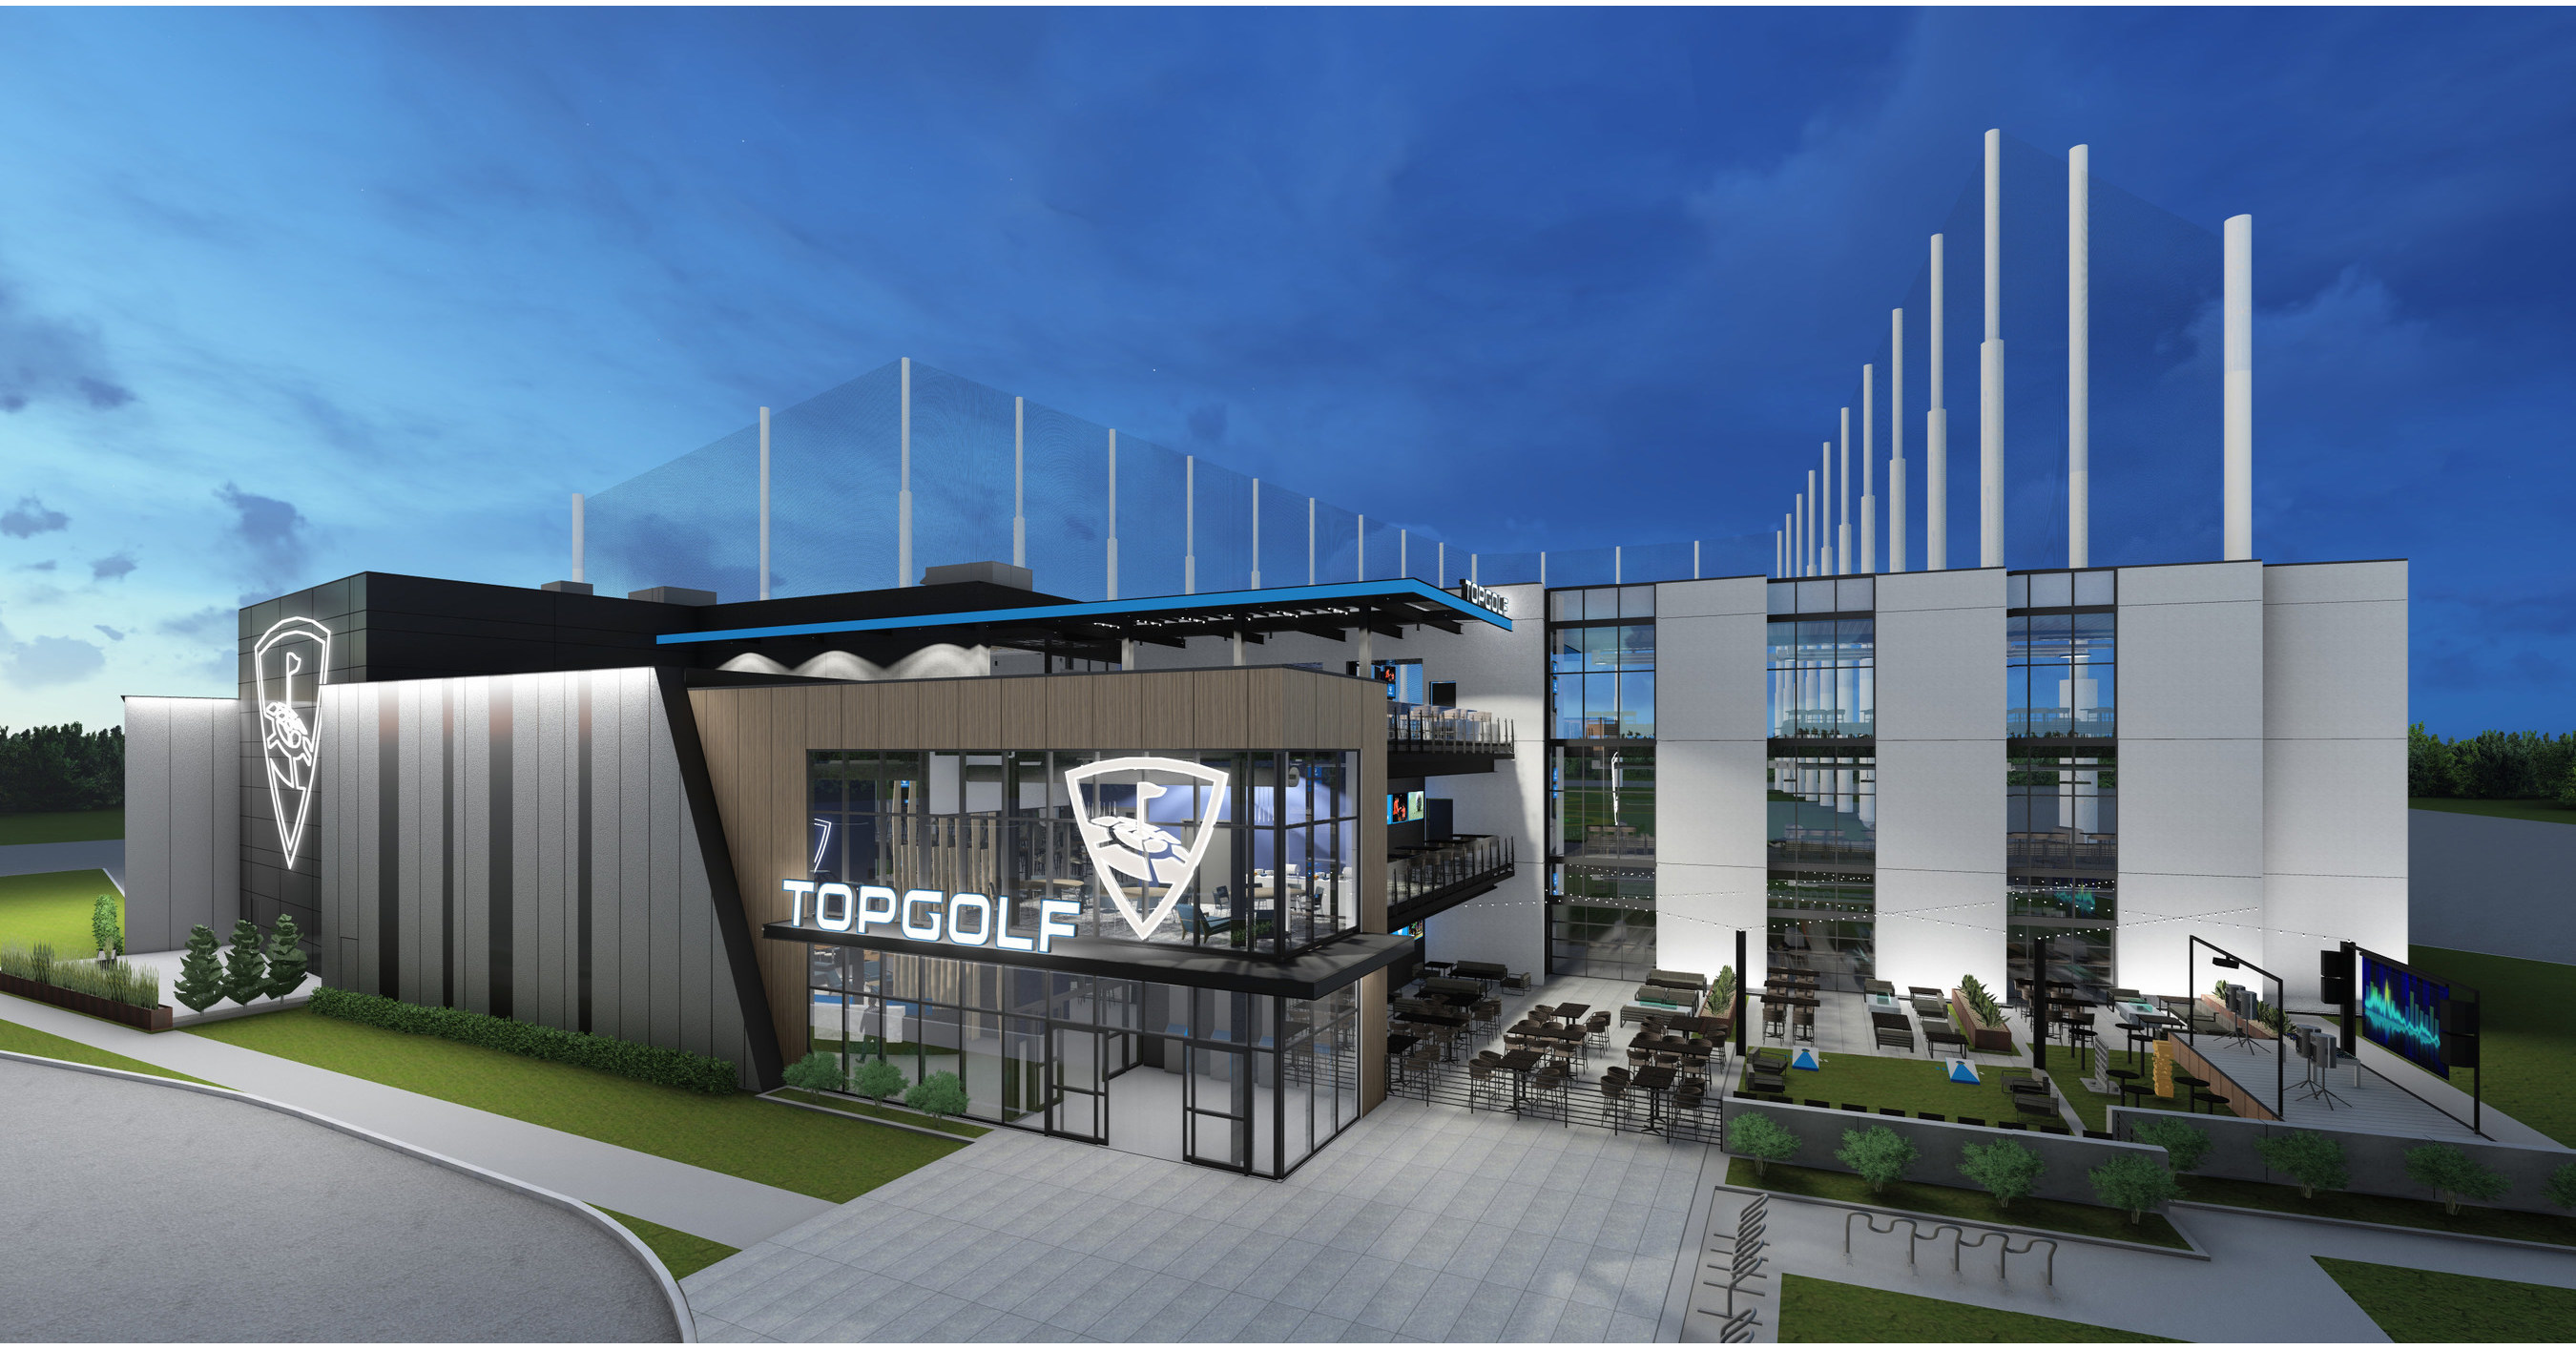 Worth the drive: An inside look at Topgolf's newest high-tech sports venue  — within range of Seattle – GeekWire